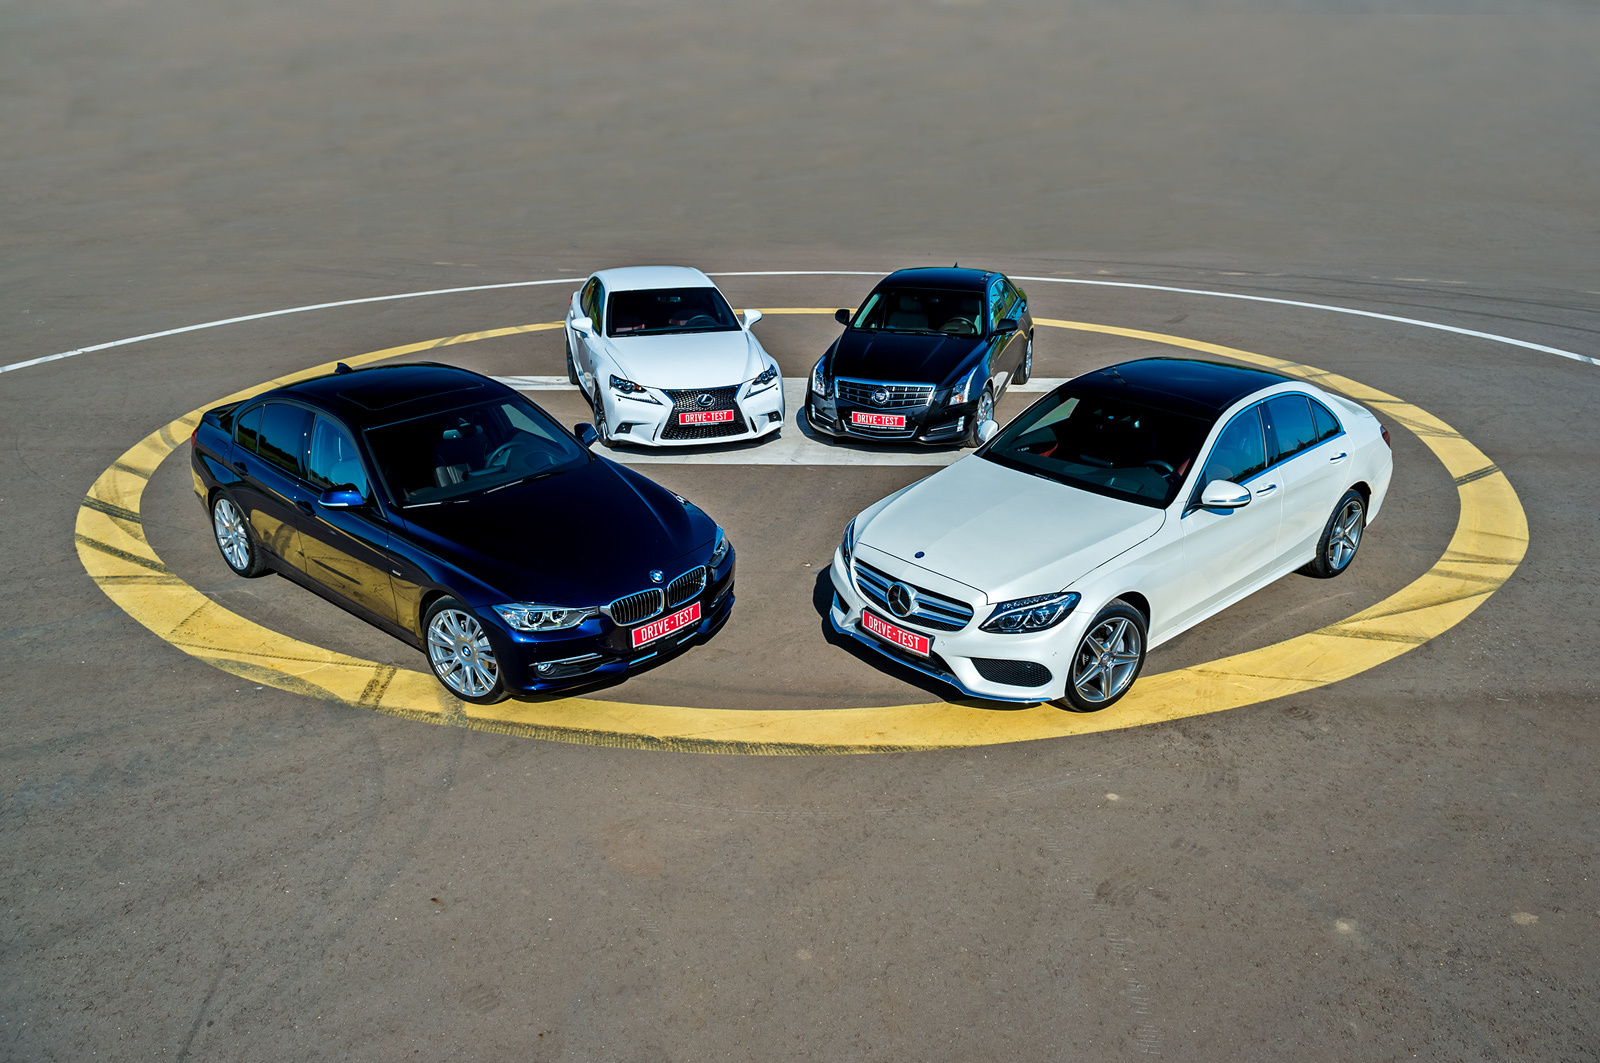 Group road test - Lexus IS 250 F Sport vs new Mercedes C 180 W205 and BMW 320i F30, Cadillac ATS